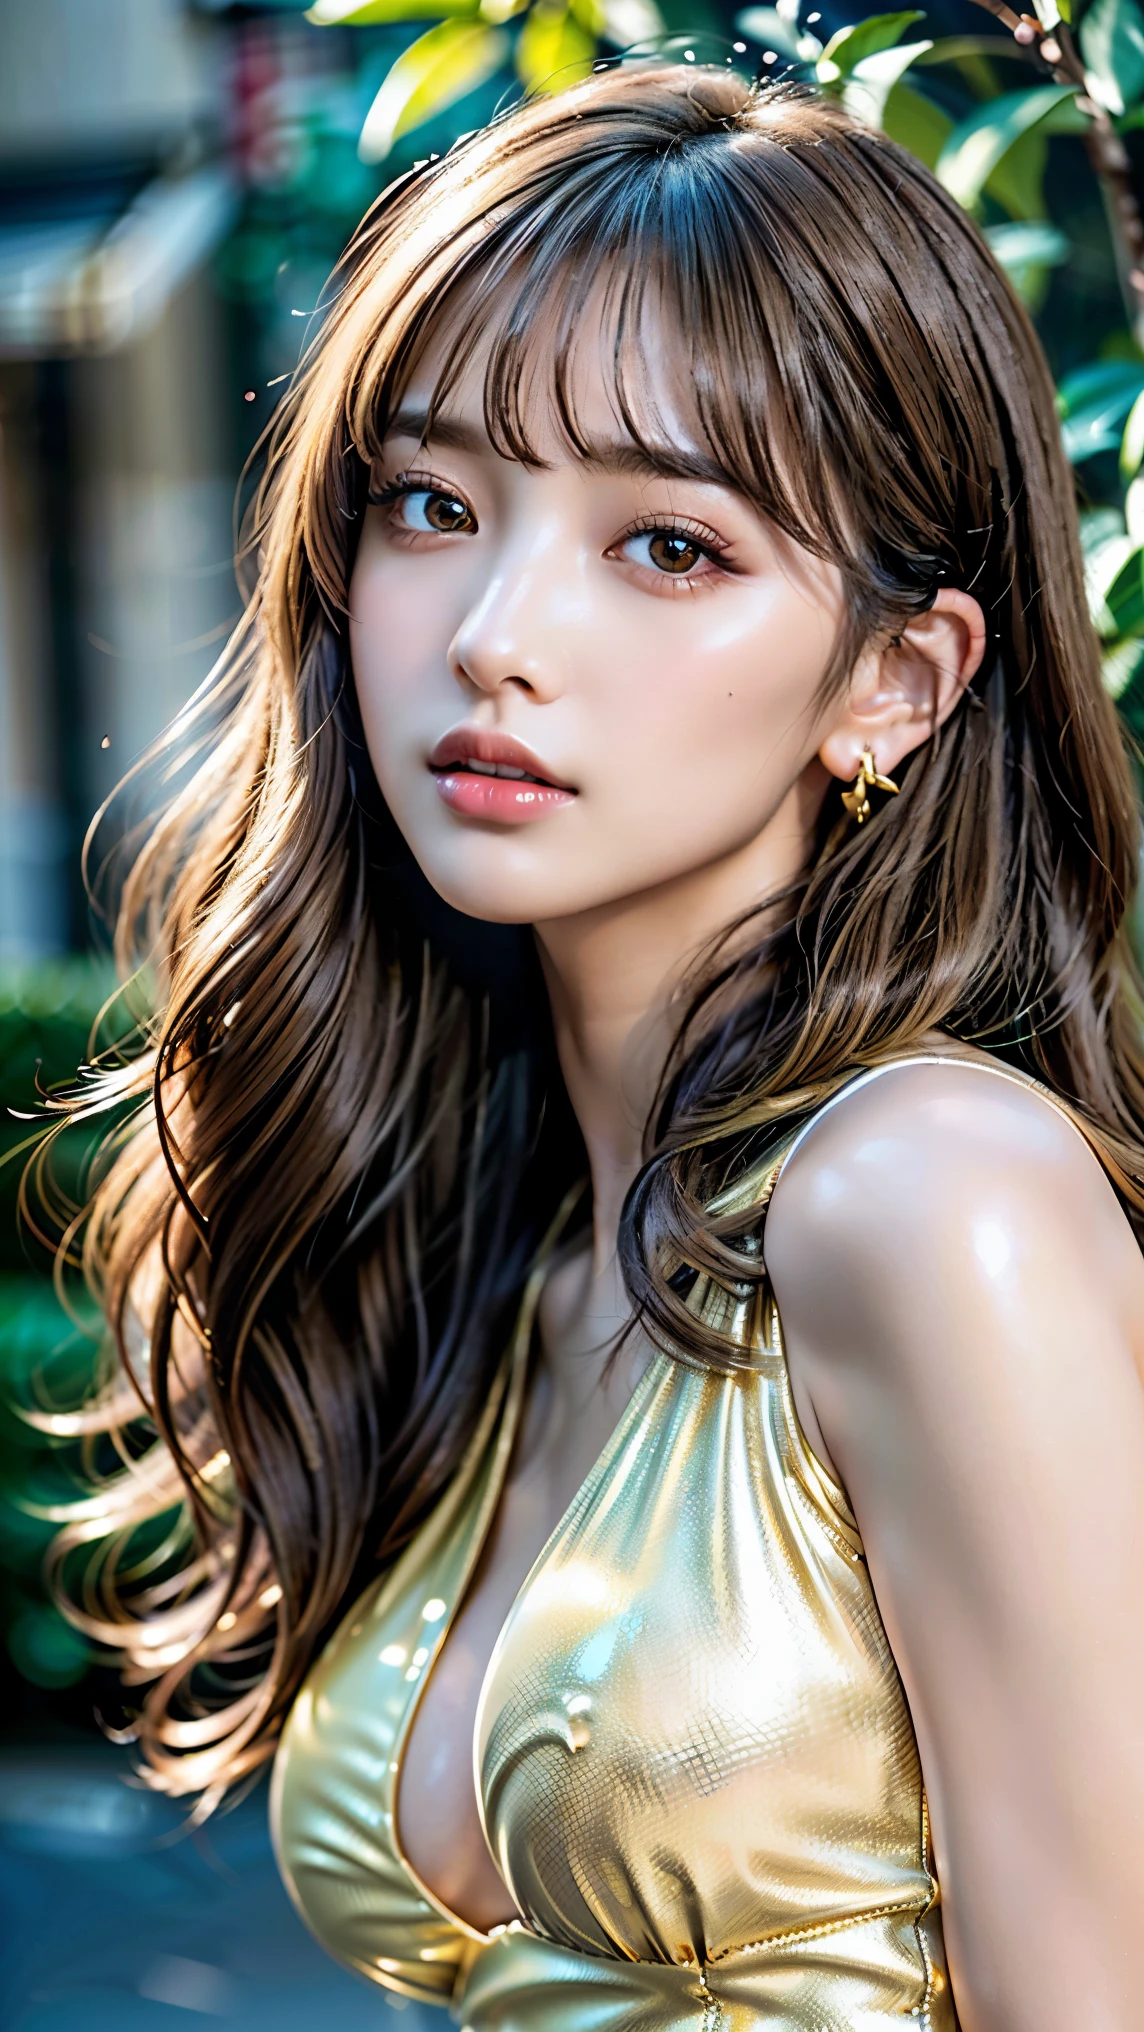 Photorealistic Realism 8K、16K quality、(Extremely absurd quality、Very detailedなディテール、Super Resolution、Clear and sharp focus、Not blurry、(Realistic brown eyes:1.35))、((The perfect dark eyeshadow:1.45))、(Super detailed、Beautiful little nose:1.2)、(Perfect composition)、Depth of written boundary、Cinematic Light、Lens flare、(Very beautiful face、Beautiful Lips、Beautiful Eyes)、Intricately detailed face、Best high quality realistic textured skin:1.3、Woman with velvet skin:1.33)、((Best high quality realistic textured hair))、(Short blonde hair、(Wave、Upward、Behind the ears)、Very detailed:1.38))、Photos of the most beautiful works of art in the world、Soft lighting、high quality、Fujifilm XT3 Sharp Focus、f 5.6、dramatic、(Perfect anatomically correct proportions)、((Perfect hands:1.2))、(Super beautiful face:1.33)、((Perfect female body:1.4))、pretty girl、((Firm and ample breasts))、(Perfect eyes of the most absurd quality:1.35)、((Super beautiful, cute and sharp face))、(Light pale complexion)、Transparent PVC(Ultra Shiny Gold Transparent Holographic Full Body Suit:1.3)、Ultra tight fitting bodysuit with ultra reflective surface、((Upper body shot above the knees))、I am looking at this、 ((Fat)),(((Glowing Skin:1.5、Light Skin: 1.5、Glowing Skin、Very Glowing Skin)))、Detailed body、Droopy eyes、(obscene、pussy line：1.2)、Thin pubic hair、High heels、